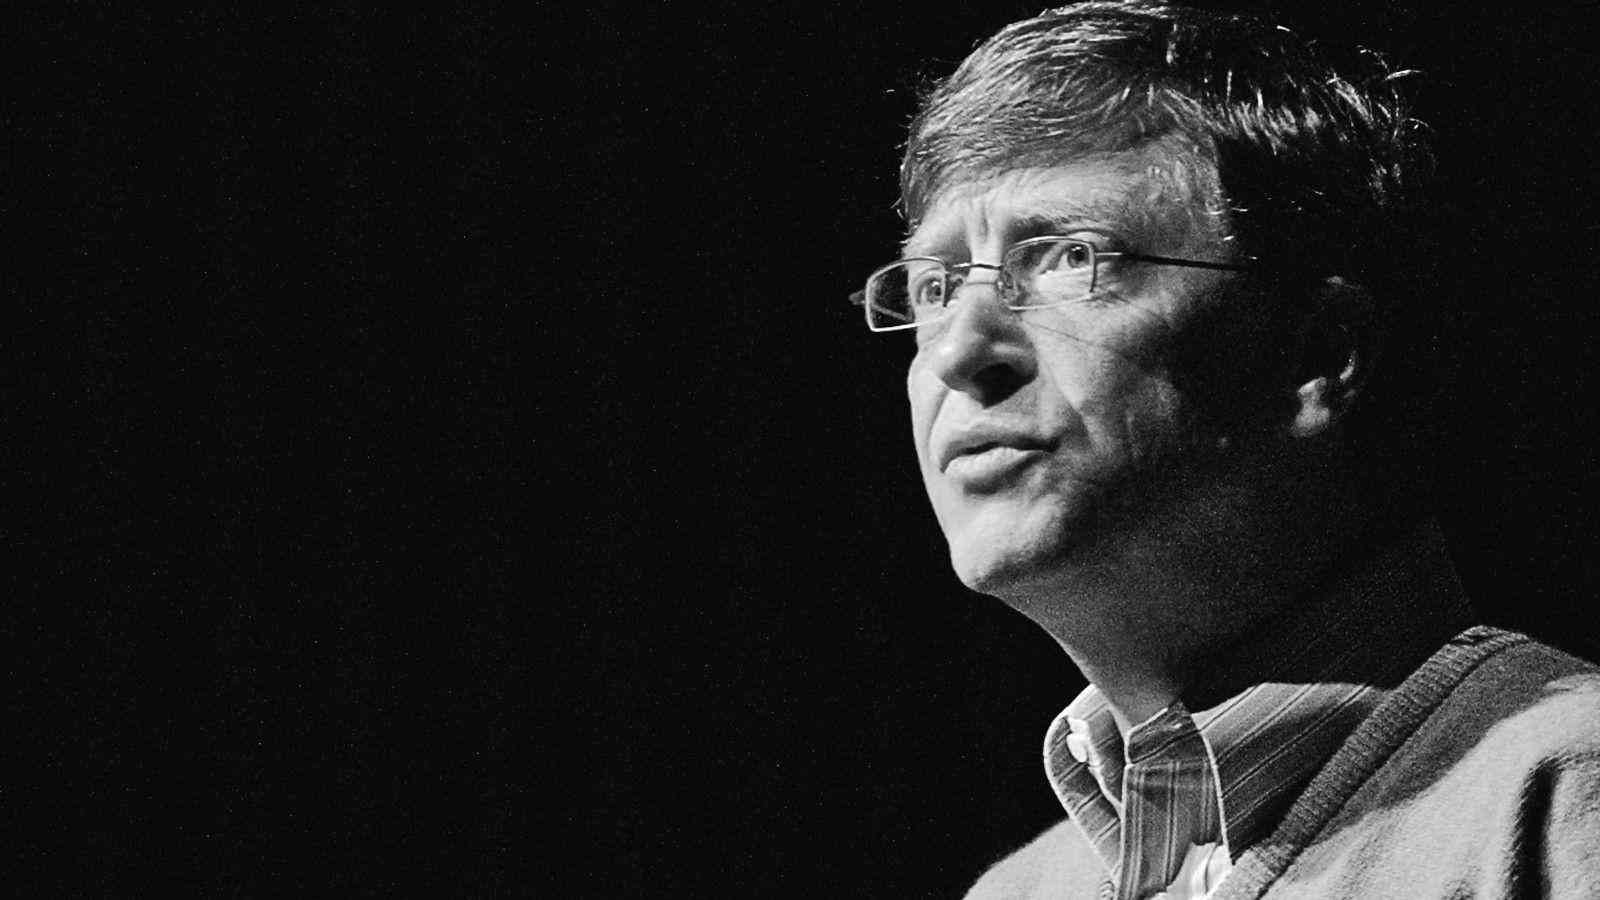 Is Sleep the Reason for the Success of Bill Gates?